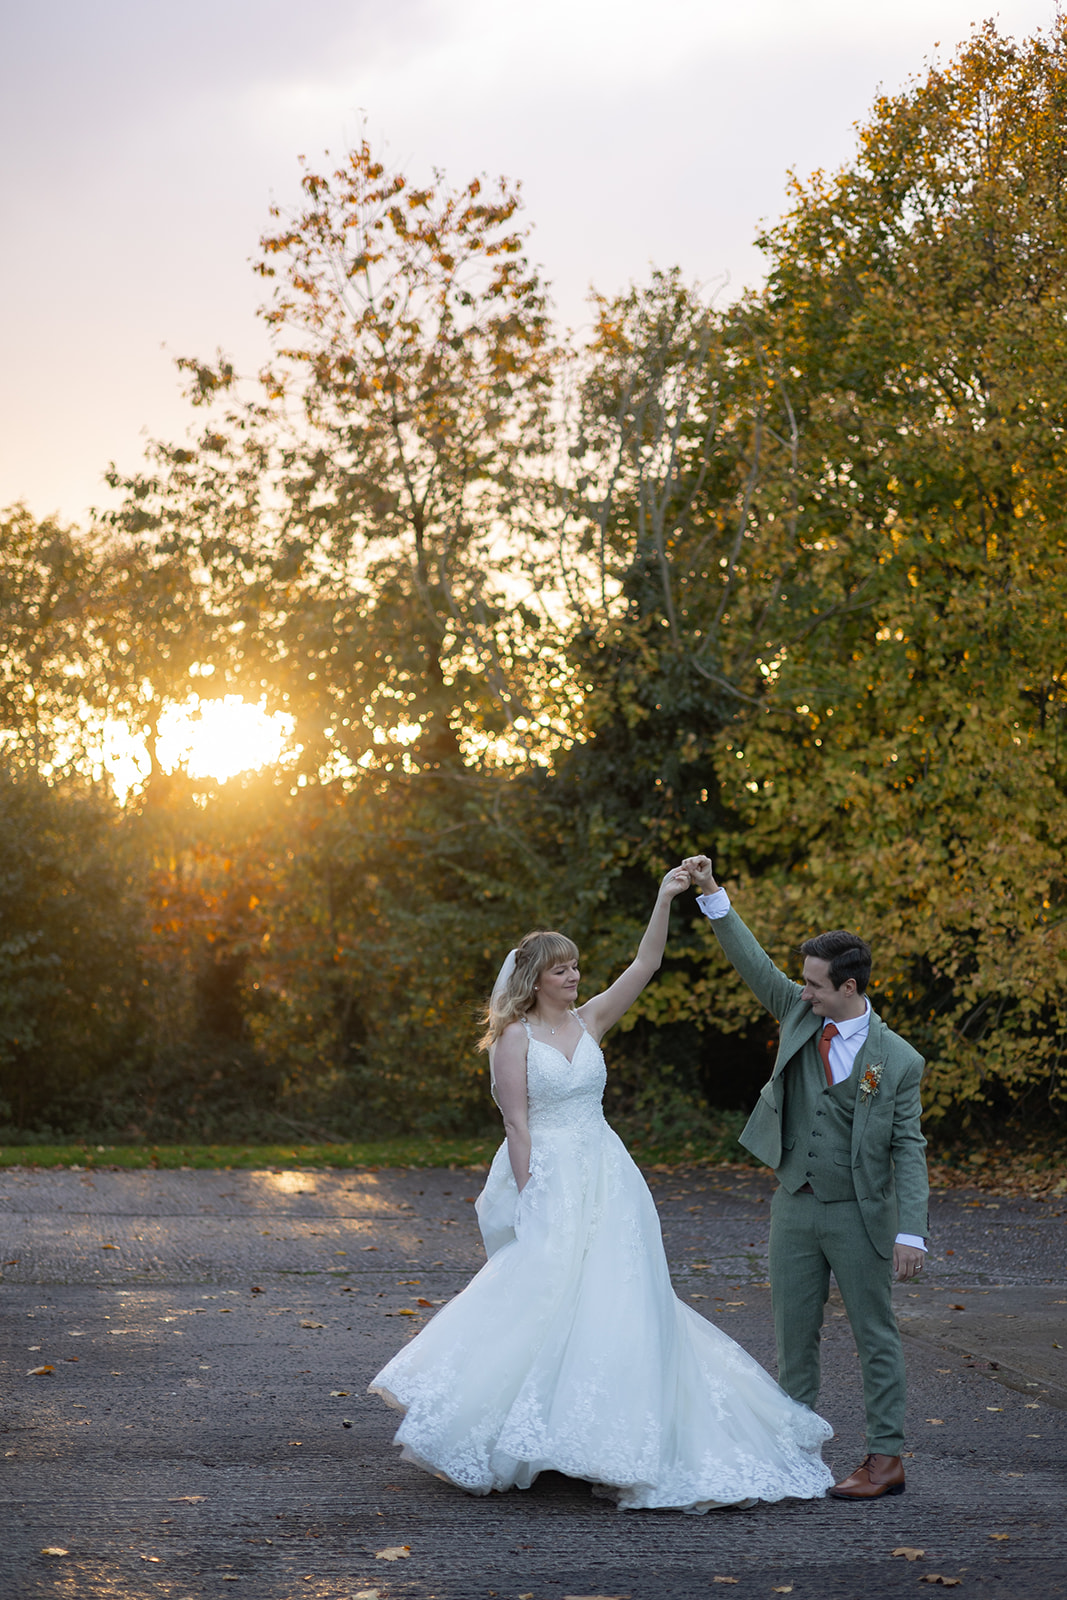 Couple on wedding day dancing at sunset